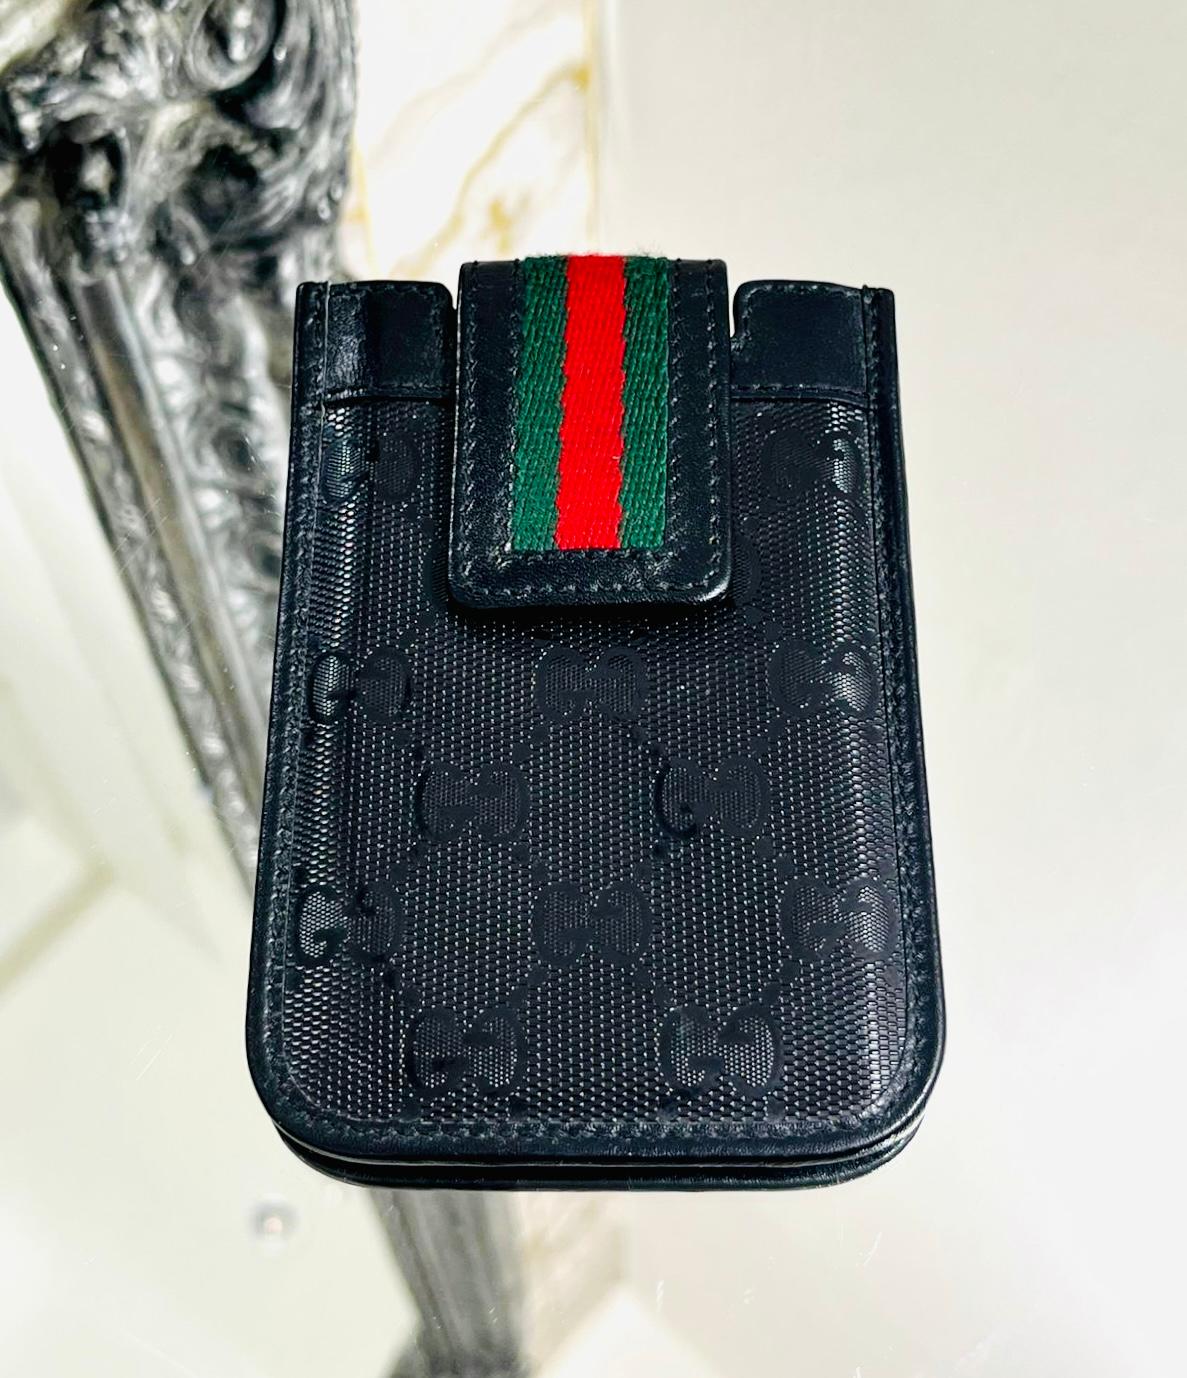 Gucci Guccissima Leather iPhone Case

Black case designed with iconic 'GG' logo monogram.

Detailed with the brand's signature green & red striped snap button closure.

Size – Height 13cm, Width 8cm, Depth 1cm

Condition – Very Good

Composition –